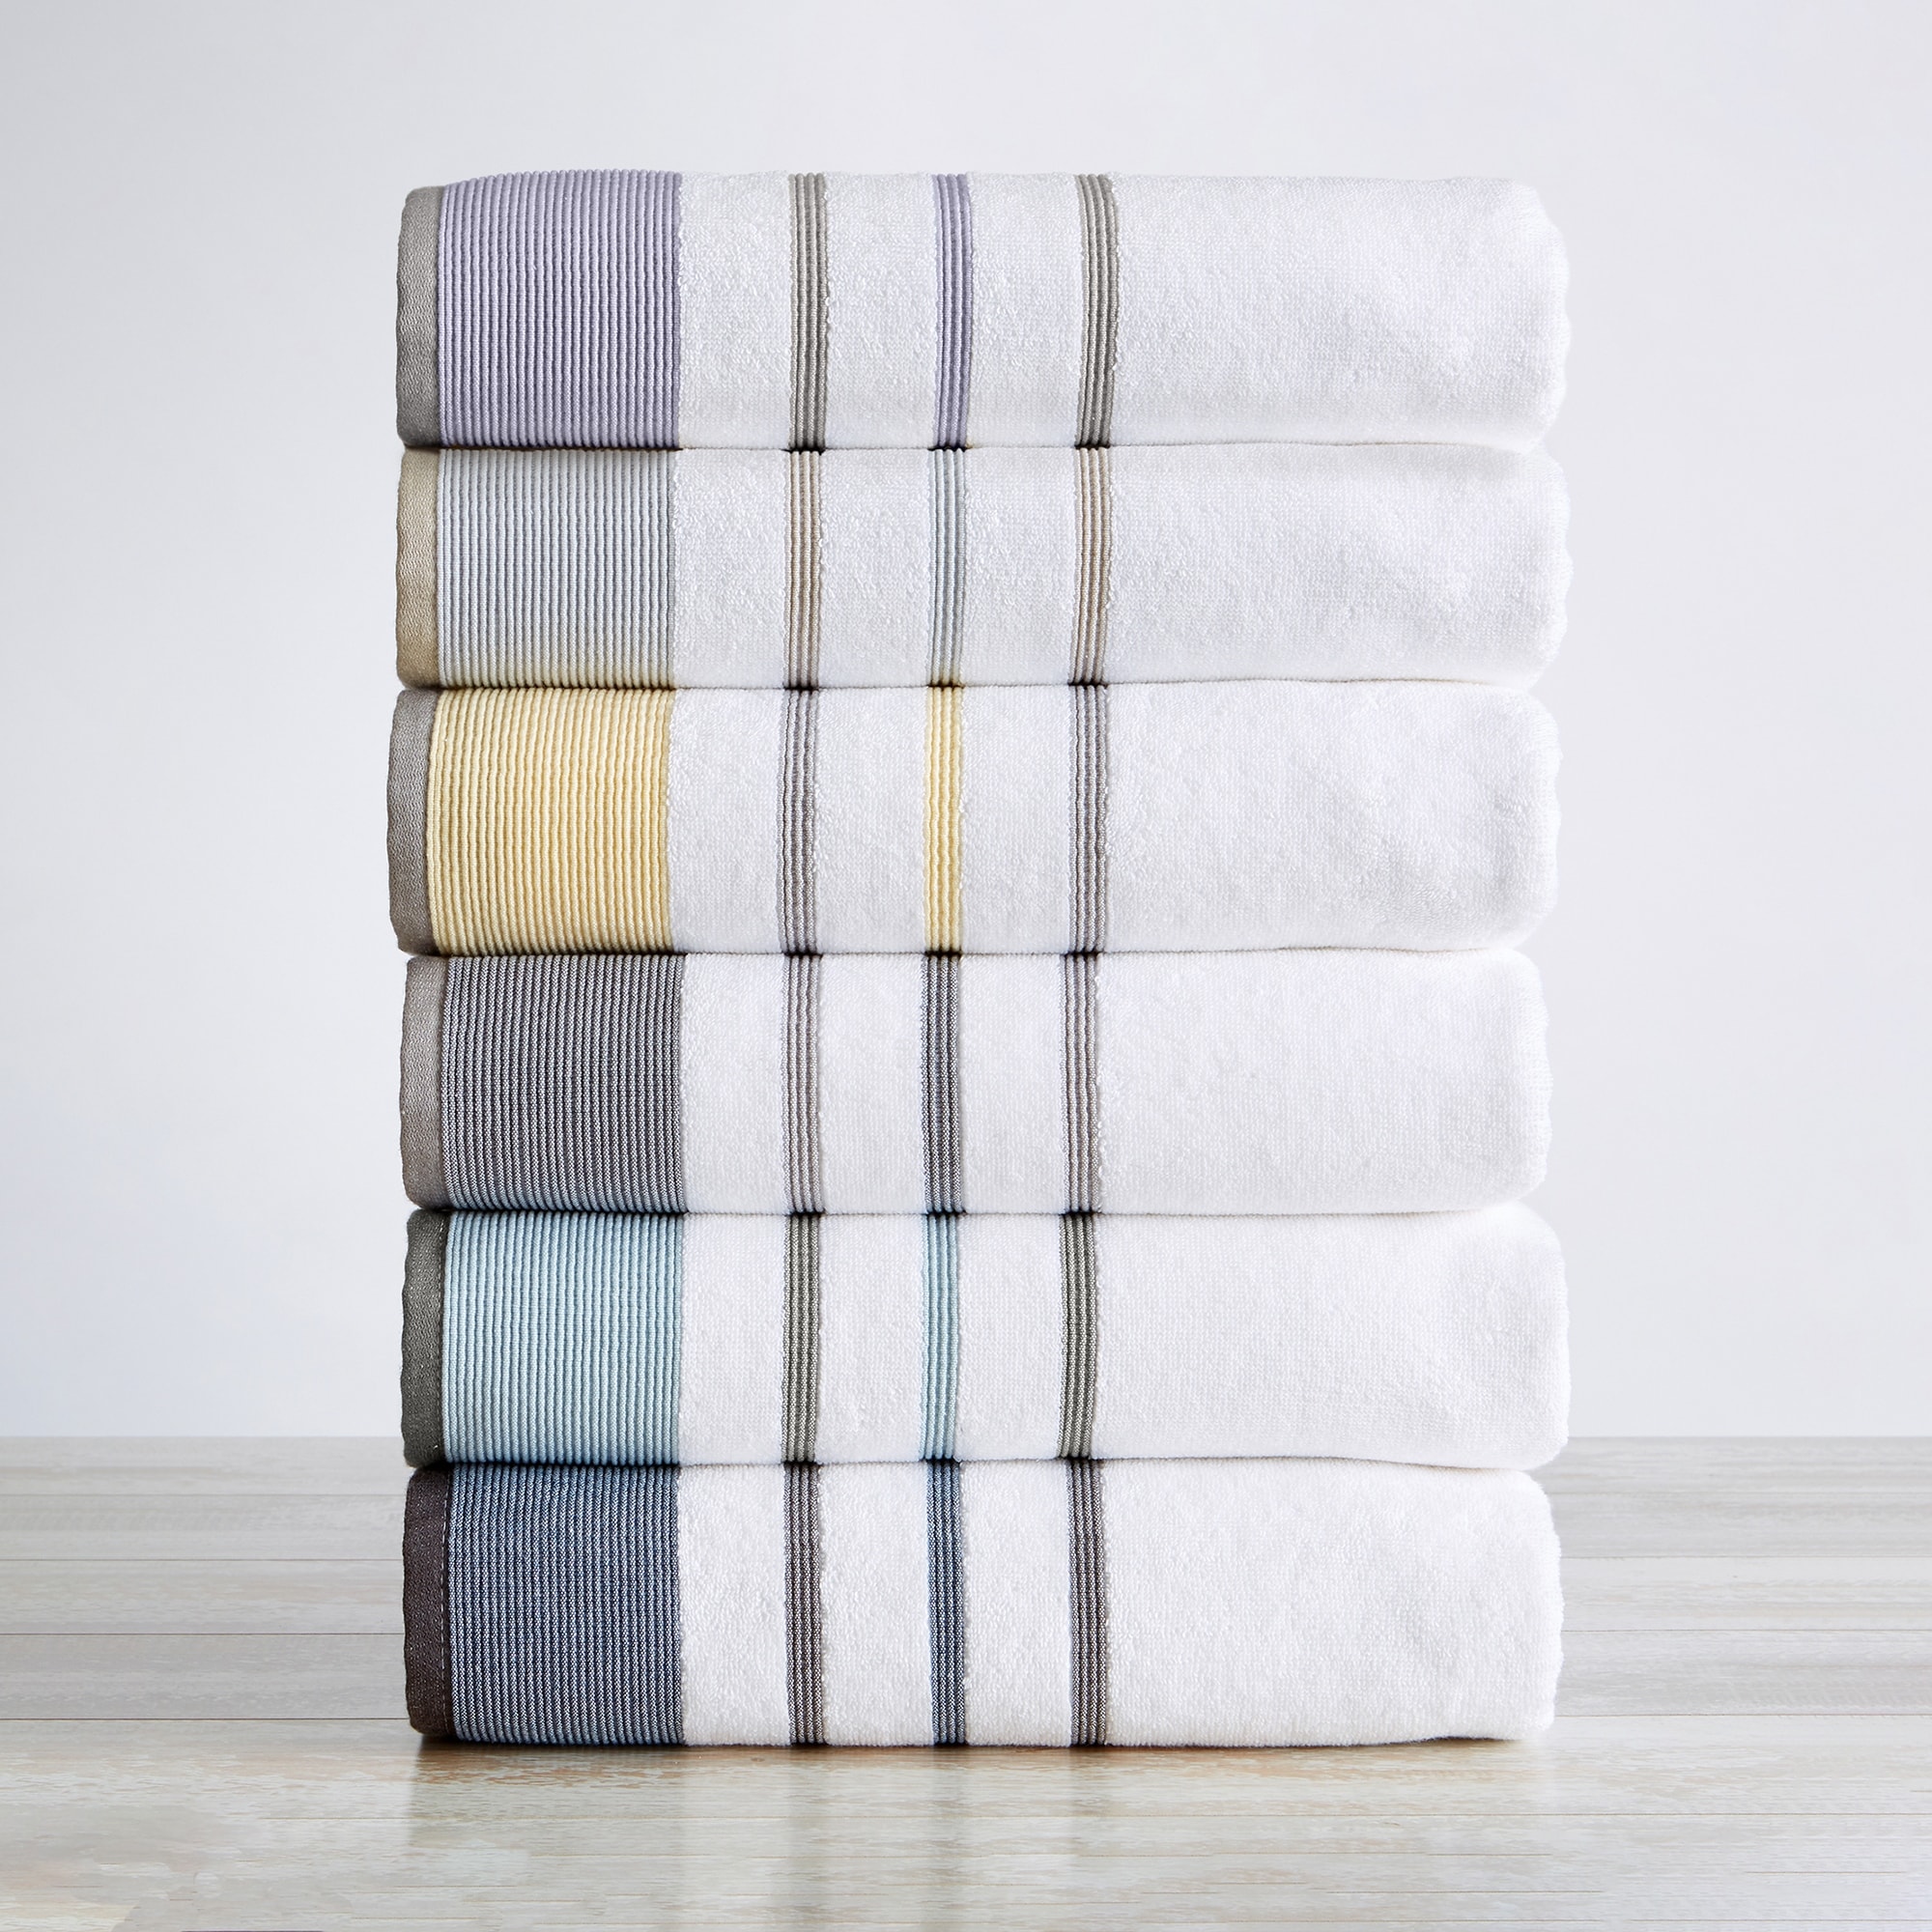 https://ak1.ostkcdn.com/images/products/is/images/direct/b513c15050bdf689b22cd15a8bc5f2c30b36a0ad/Great-Bay-Home-Turkish-Cotton-Striped-Bath-Towel-Sets.jpg